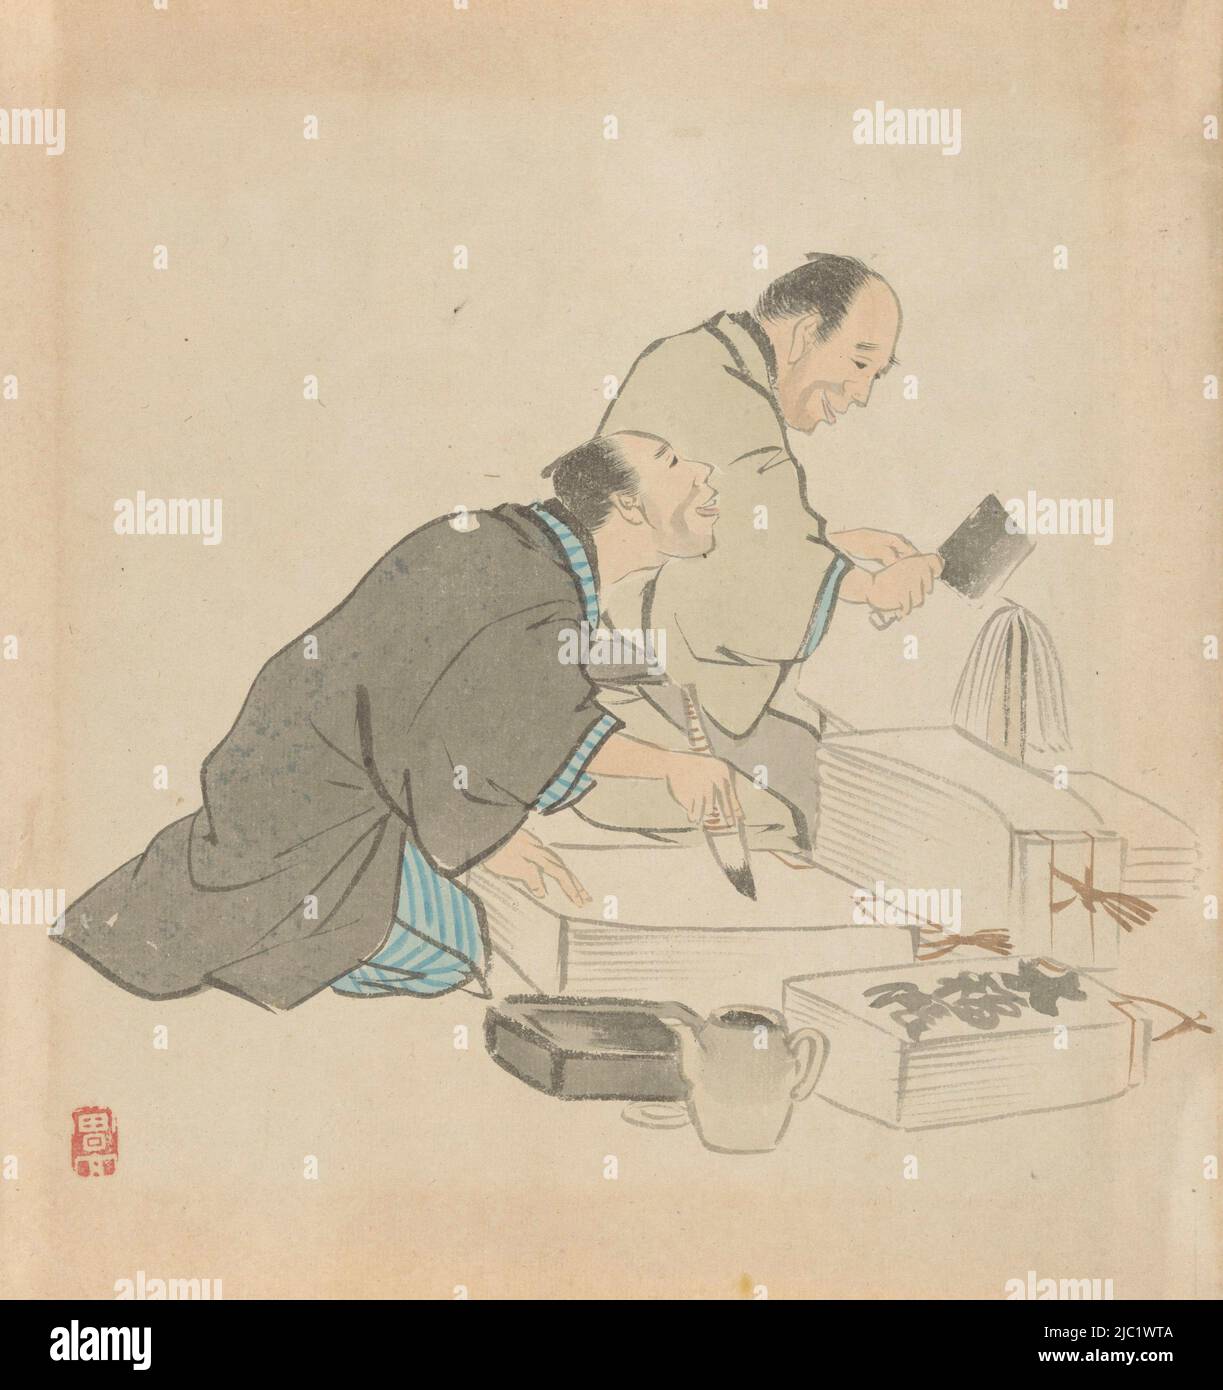 Japanese calligrapher and a Japanese bookbinder, draughtsman: anonymous, c. 1900, paper, brush, h 235 mm × w 220 mm Stock Photo